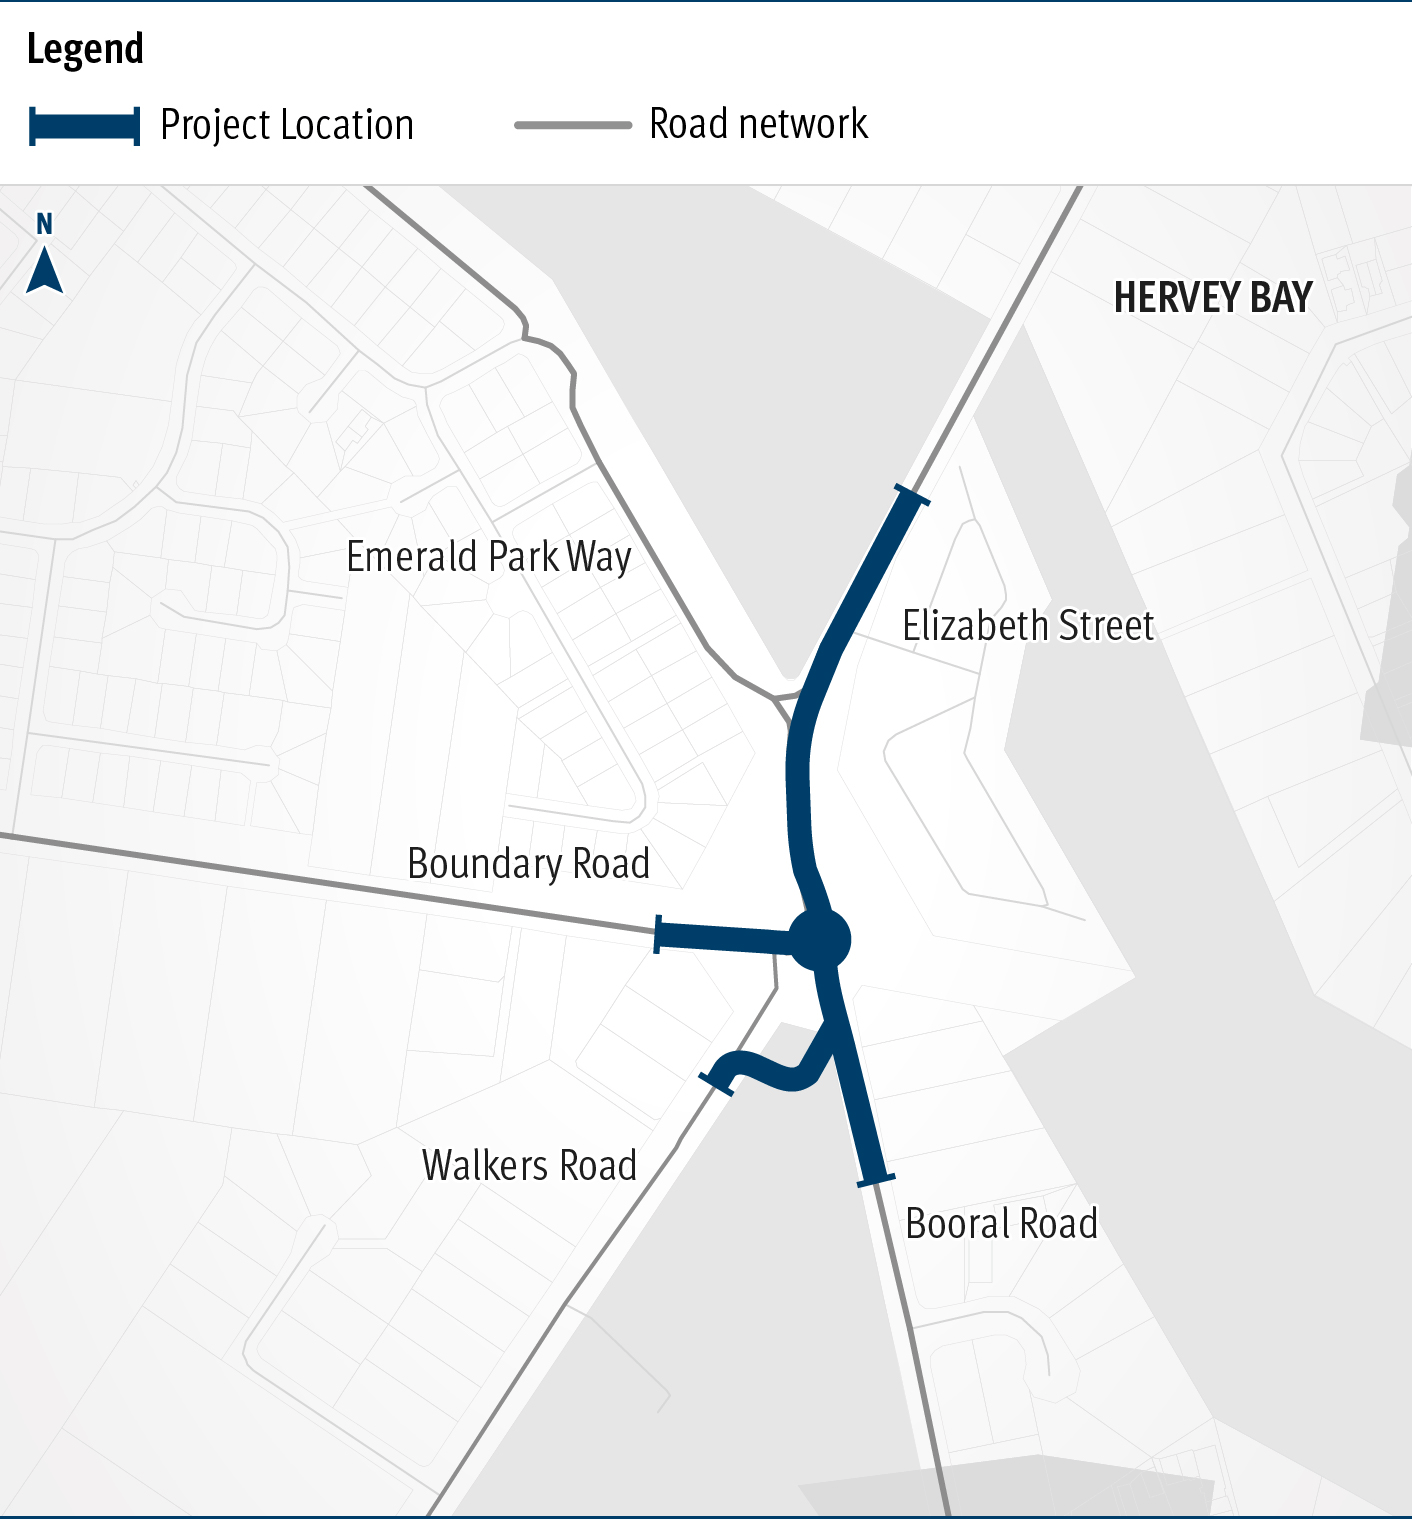 The map shows the locality of the proposed Booral Road and Boundary Road intersection upgrade. Hervey Bay is located north-east of the project location. A solid blue line indicates the project extent, which encompasses the Booral Road and Boundary Road intersection, and also extends along Booral Road to the north past the Emerald Park Way intersection and to the south along Booral Road past the proposed new Walkers Road intersection. Walkers Road has been realigned to access Booral Road to the south of the Booral Road and Boundary Road intersection. The local road network, including where Booral Road turns into Elizabeth Street, is also highlighted on the map.